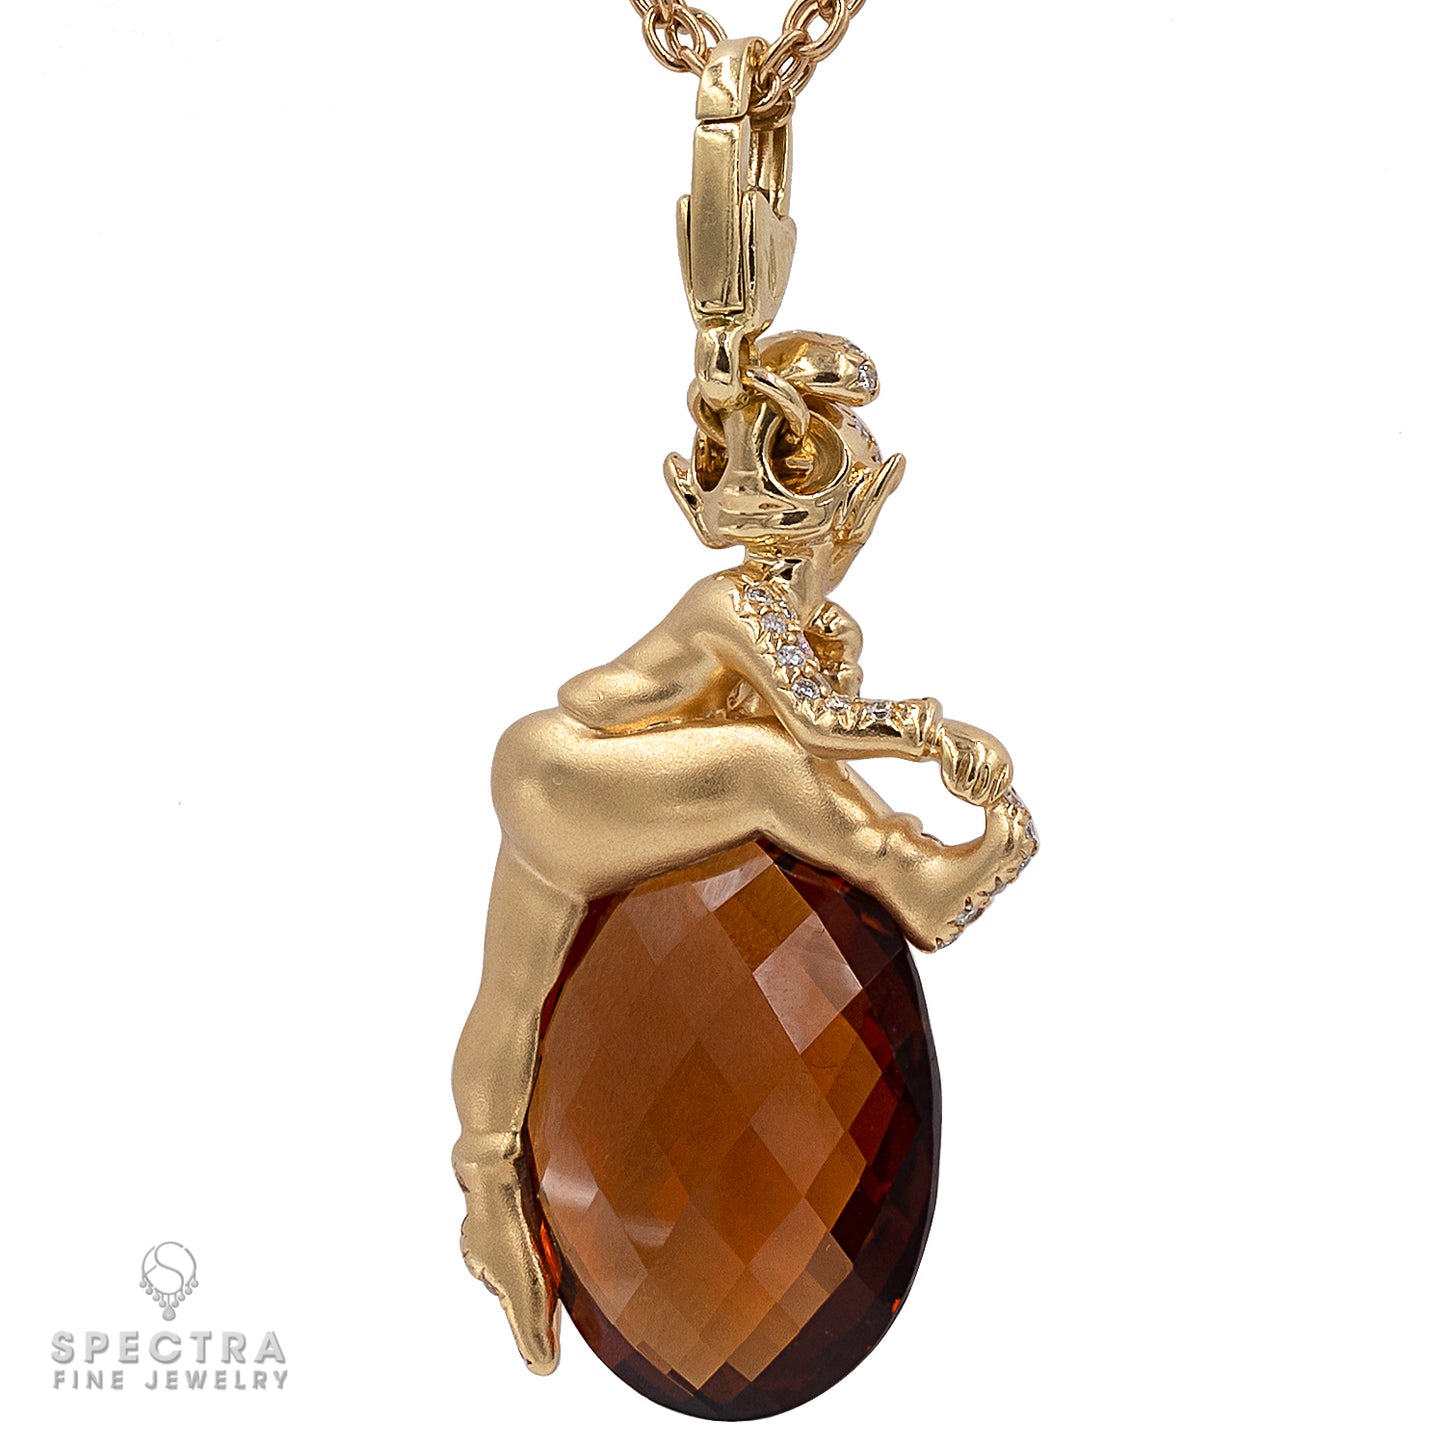 Crivelli's Elf Pendant: 18K Yellow Gold with Diamond Accents